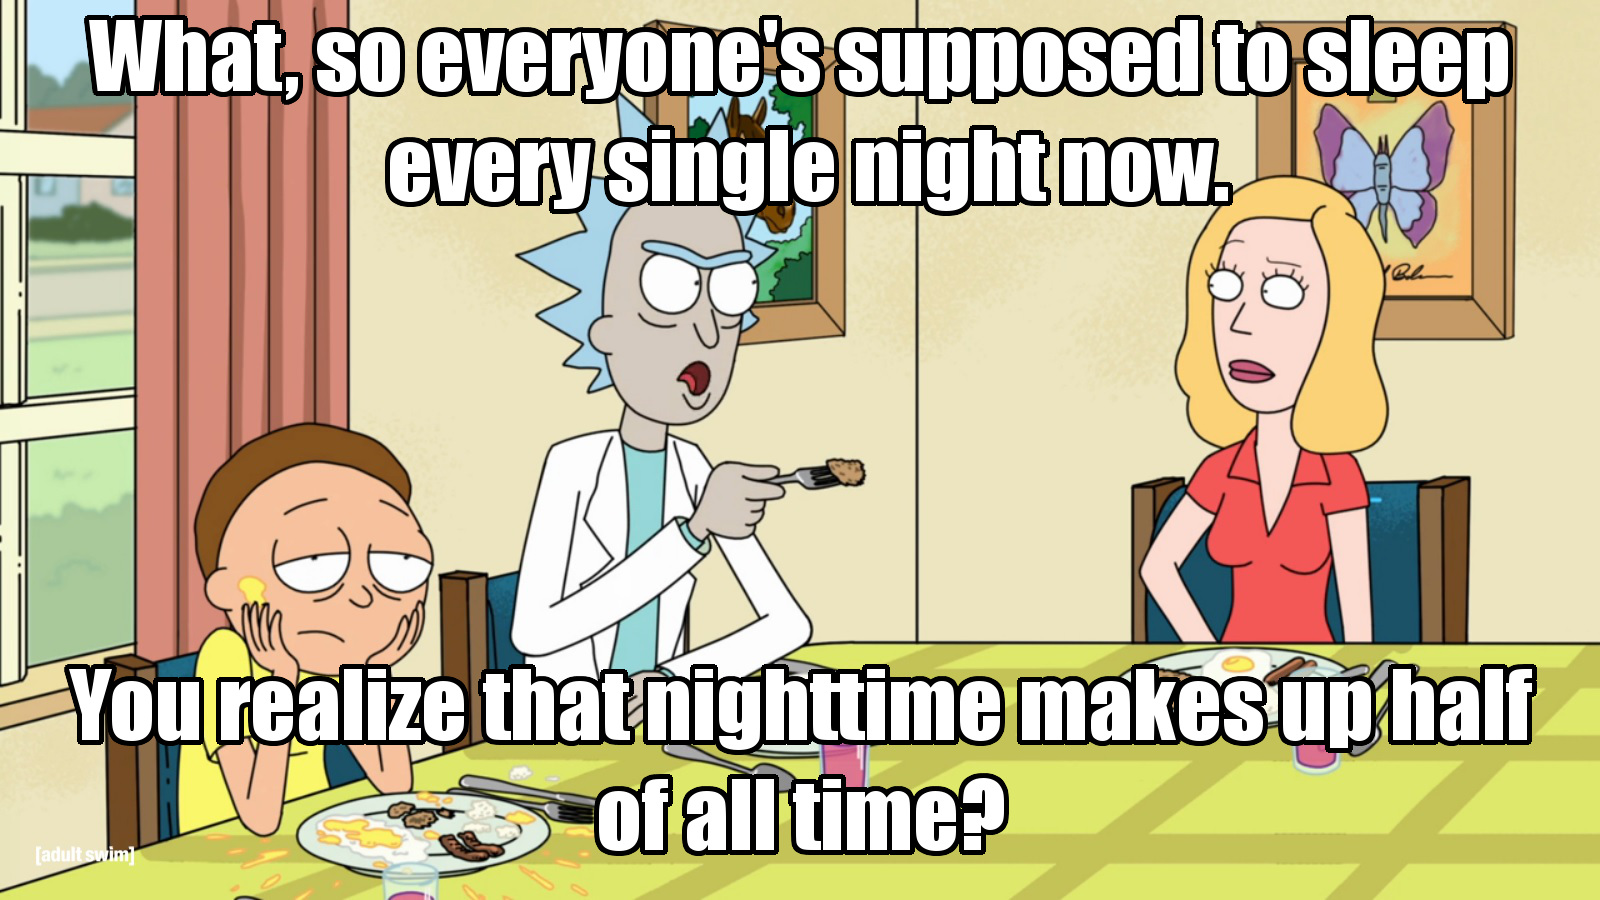 Funny Rick and Morty Memes about nighttime